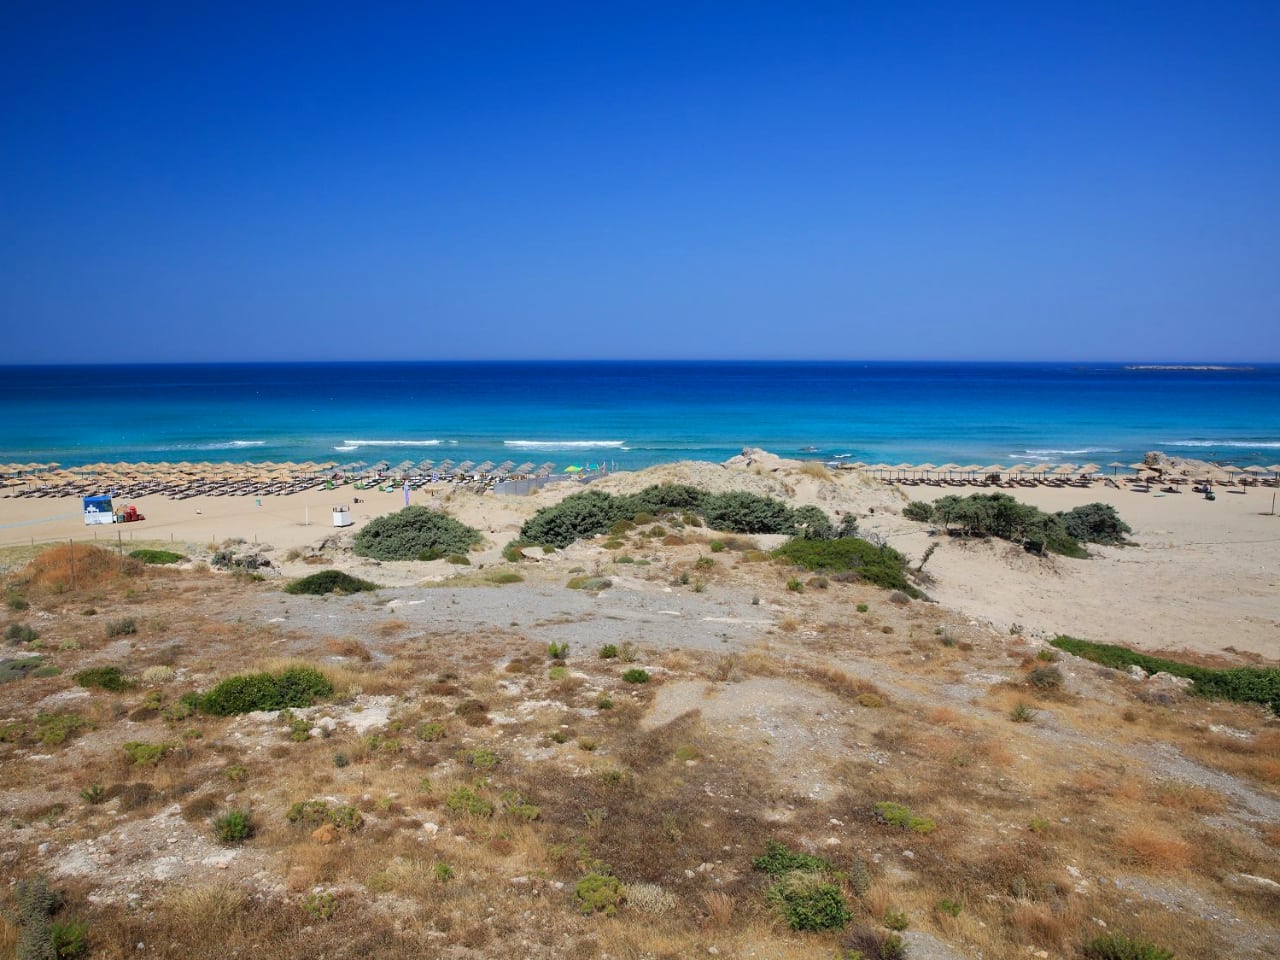 Private Tour To Elafonisi and Falasarna Beaches, chania town tour to elafonisi and falassarna beach, falasarna beach, elafonisi beach, private tours chania, activities chania, crete travel 